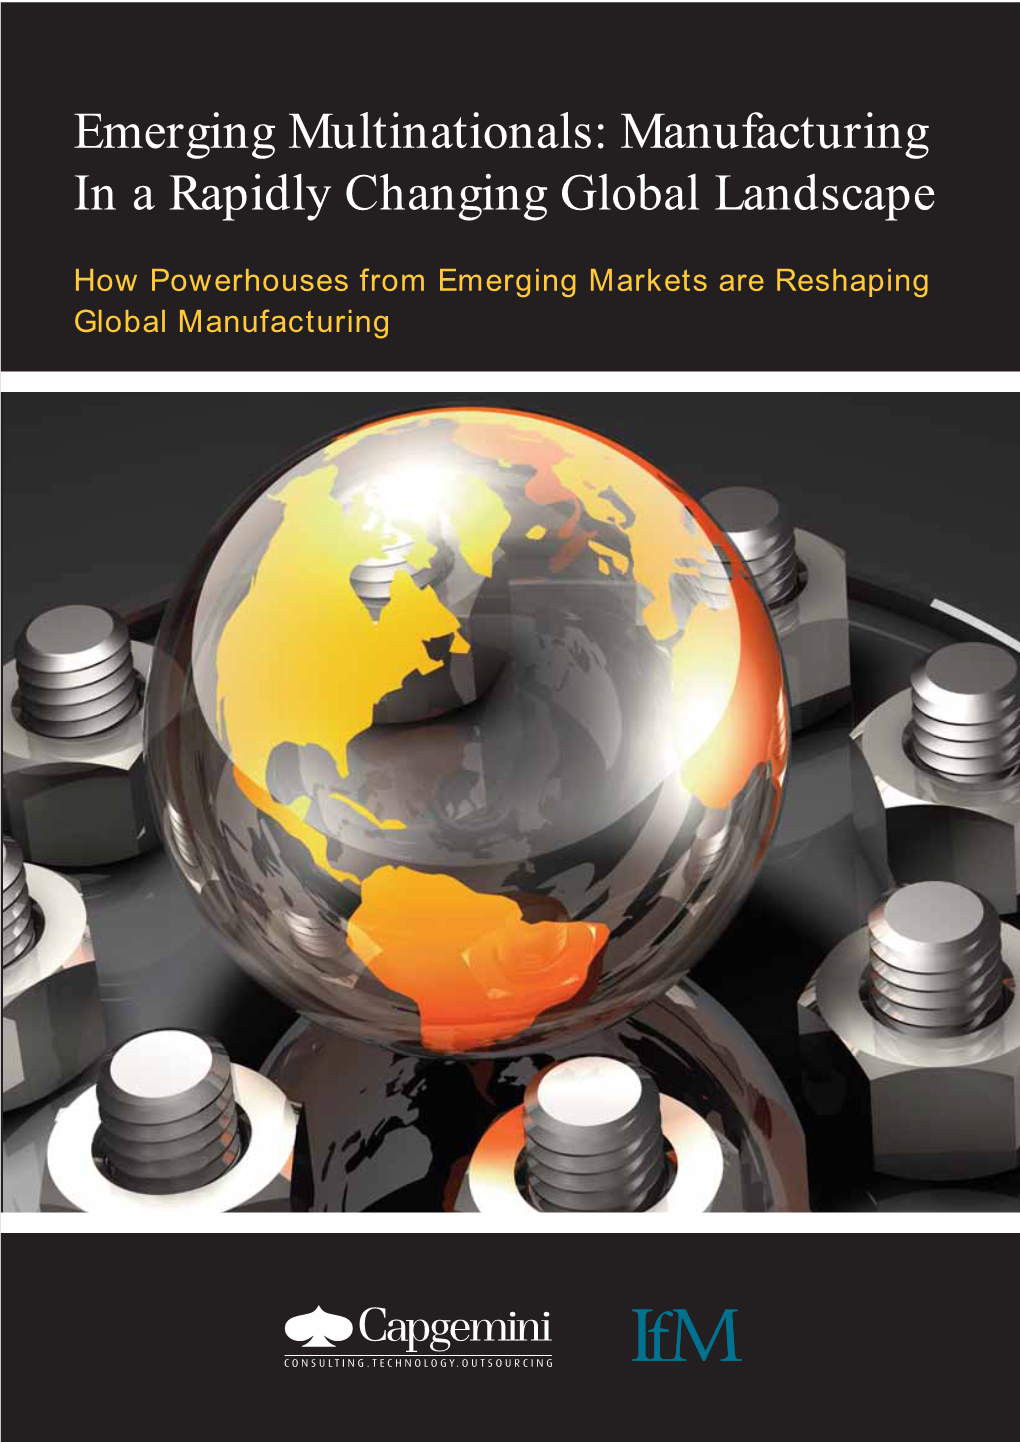 Emerging Multinationals: Manufacturing in a Rapidly Changing Global Landscape